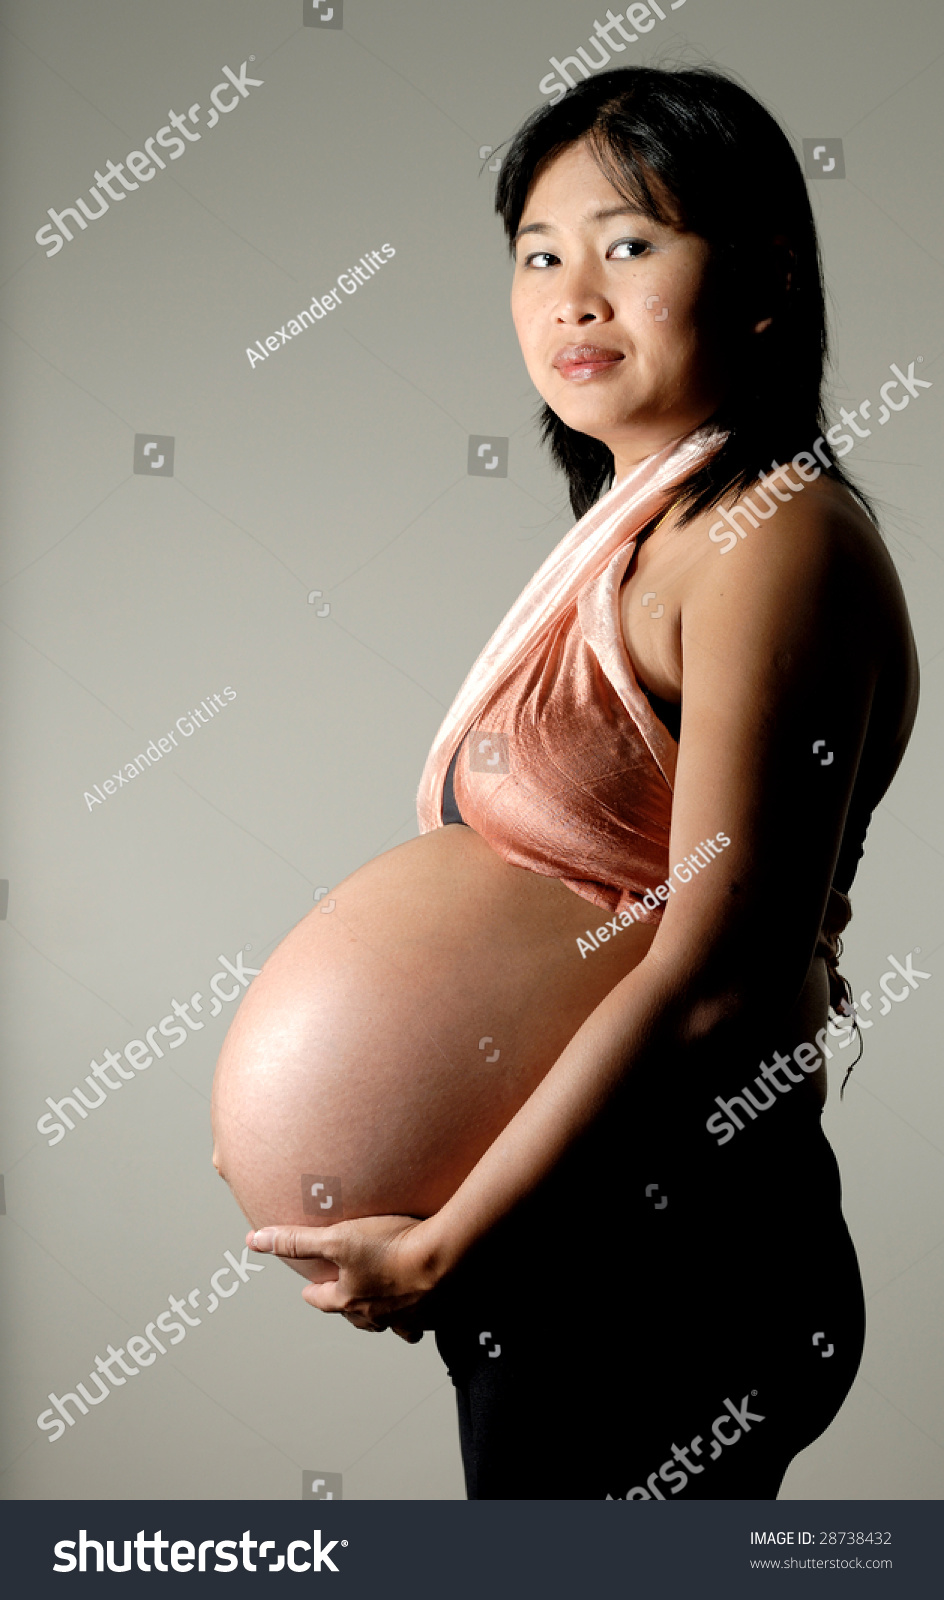 Pregnant Women With Twins 53